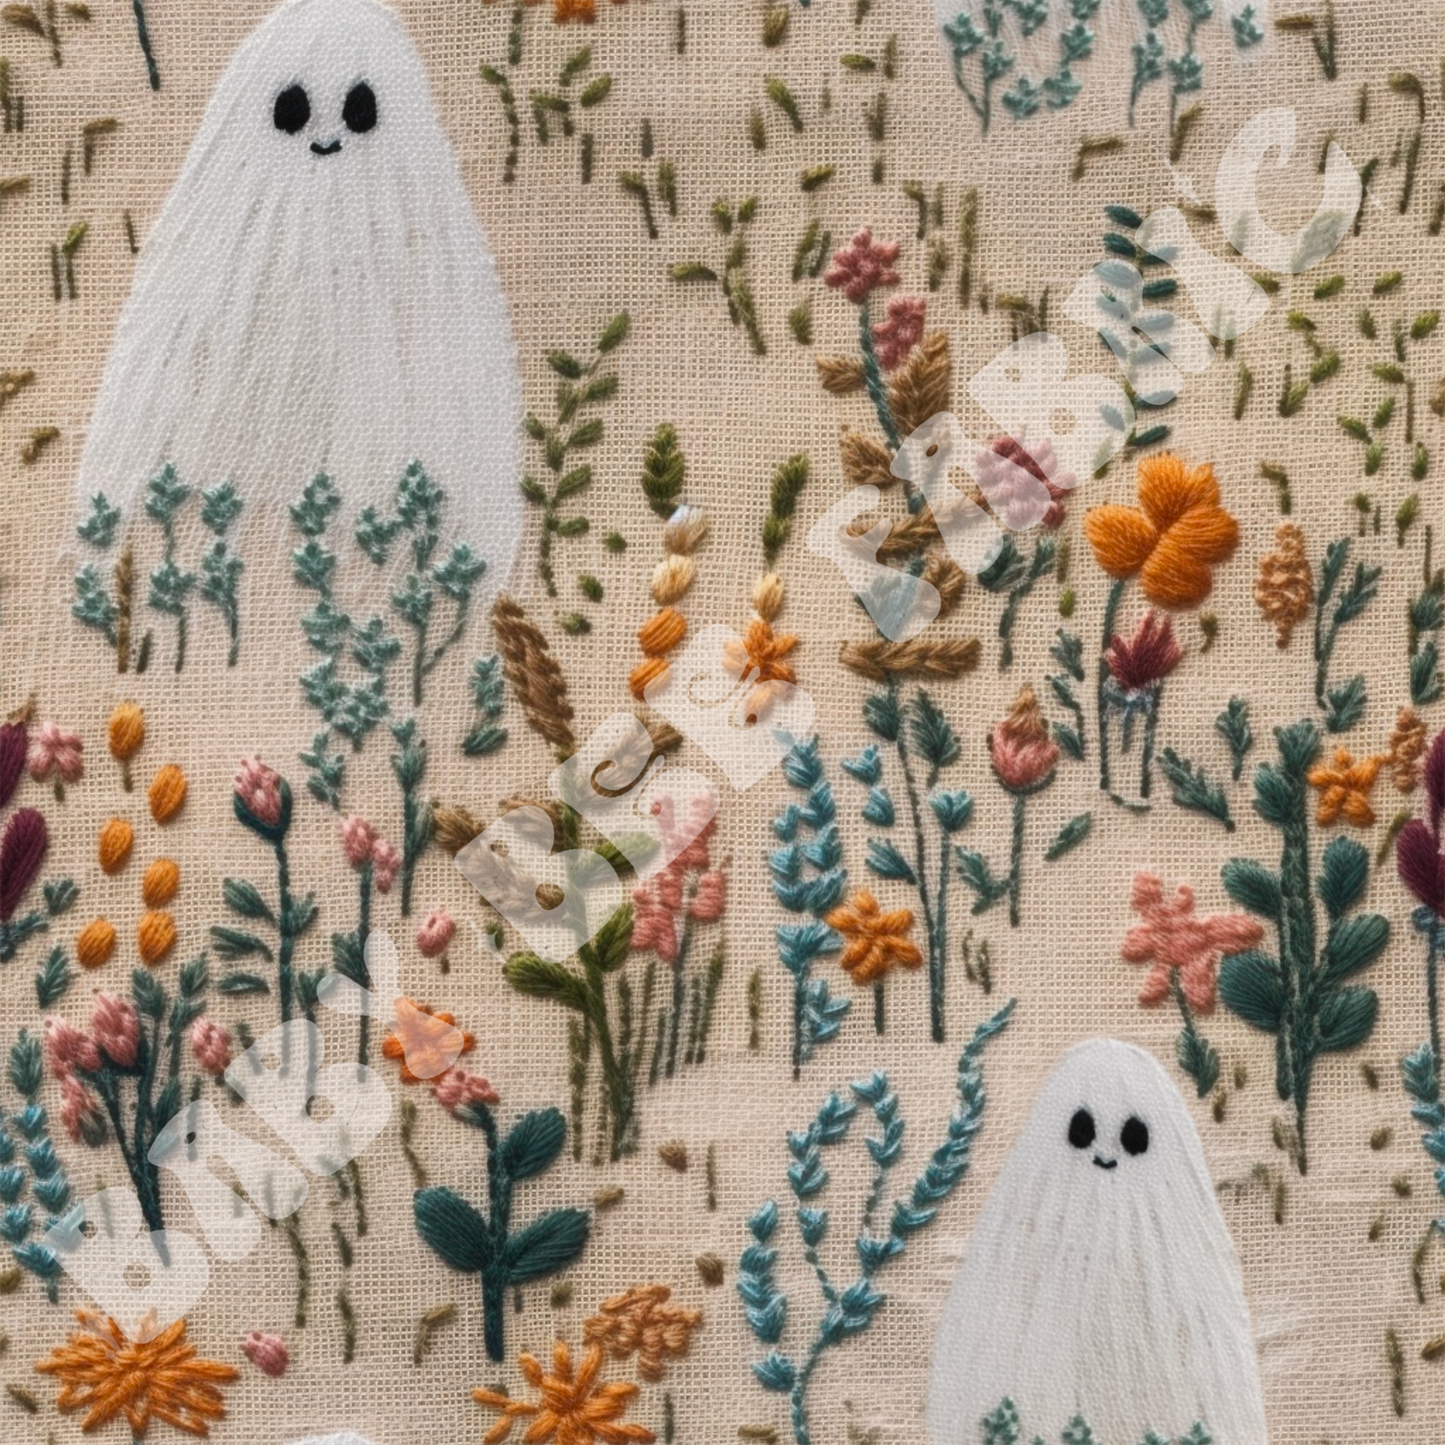 Embroidered Ghosts